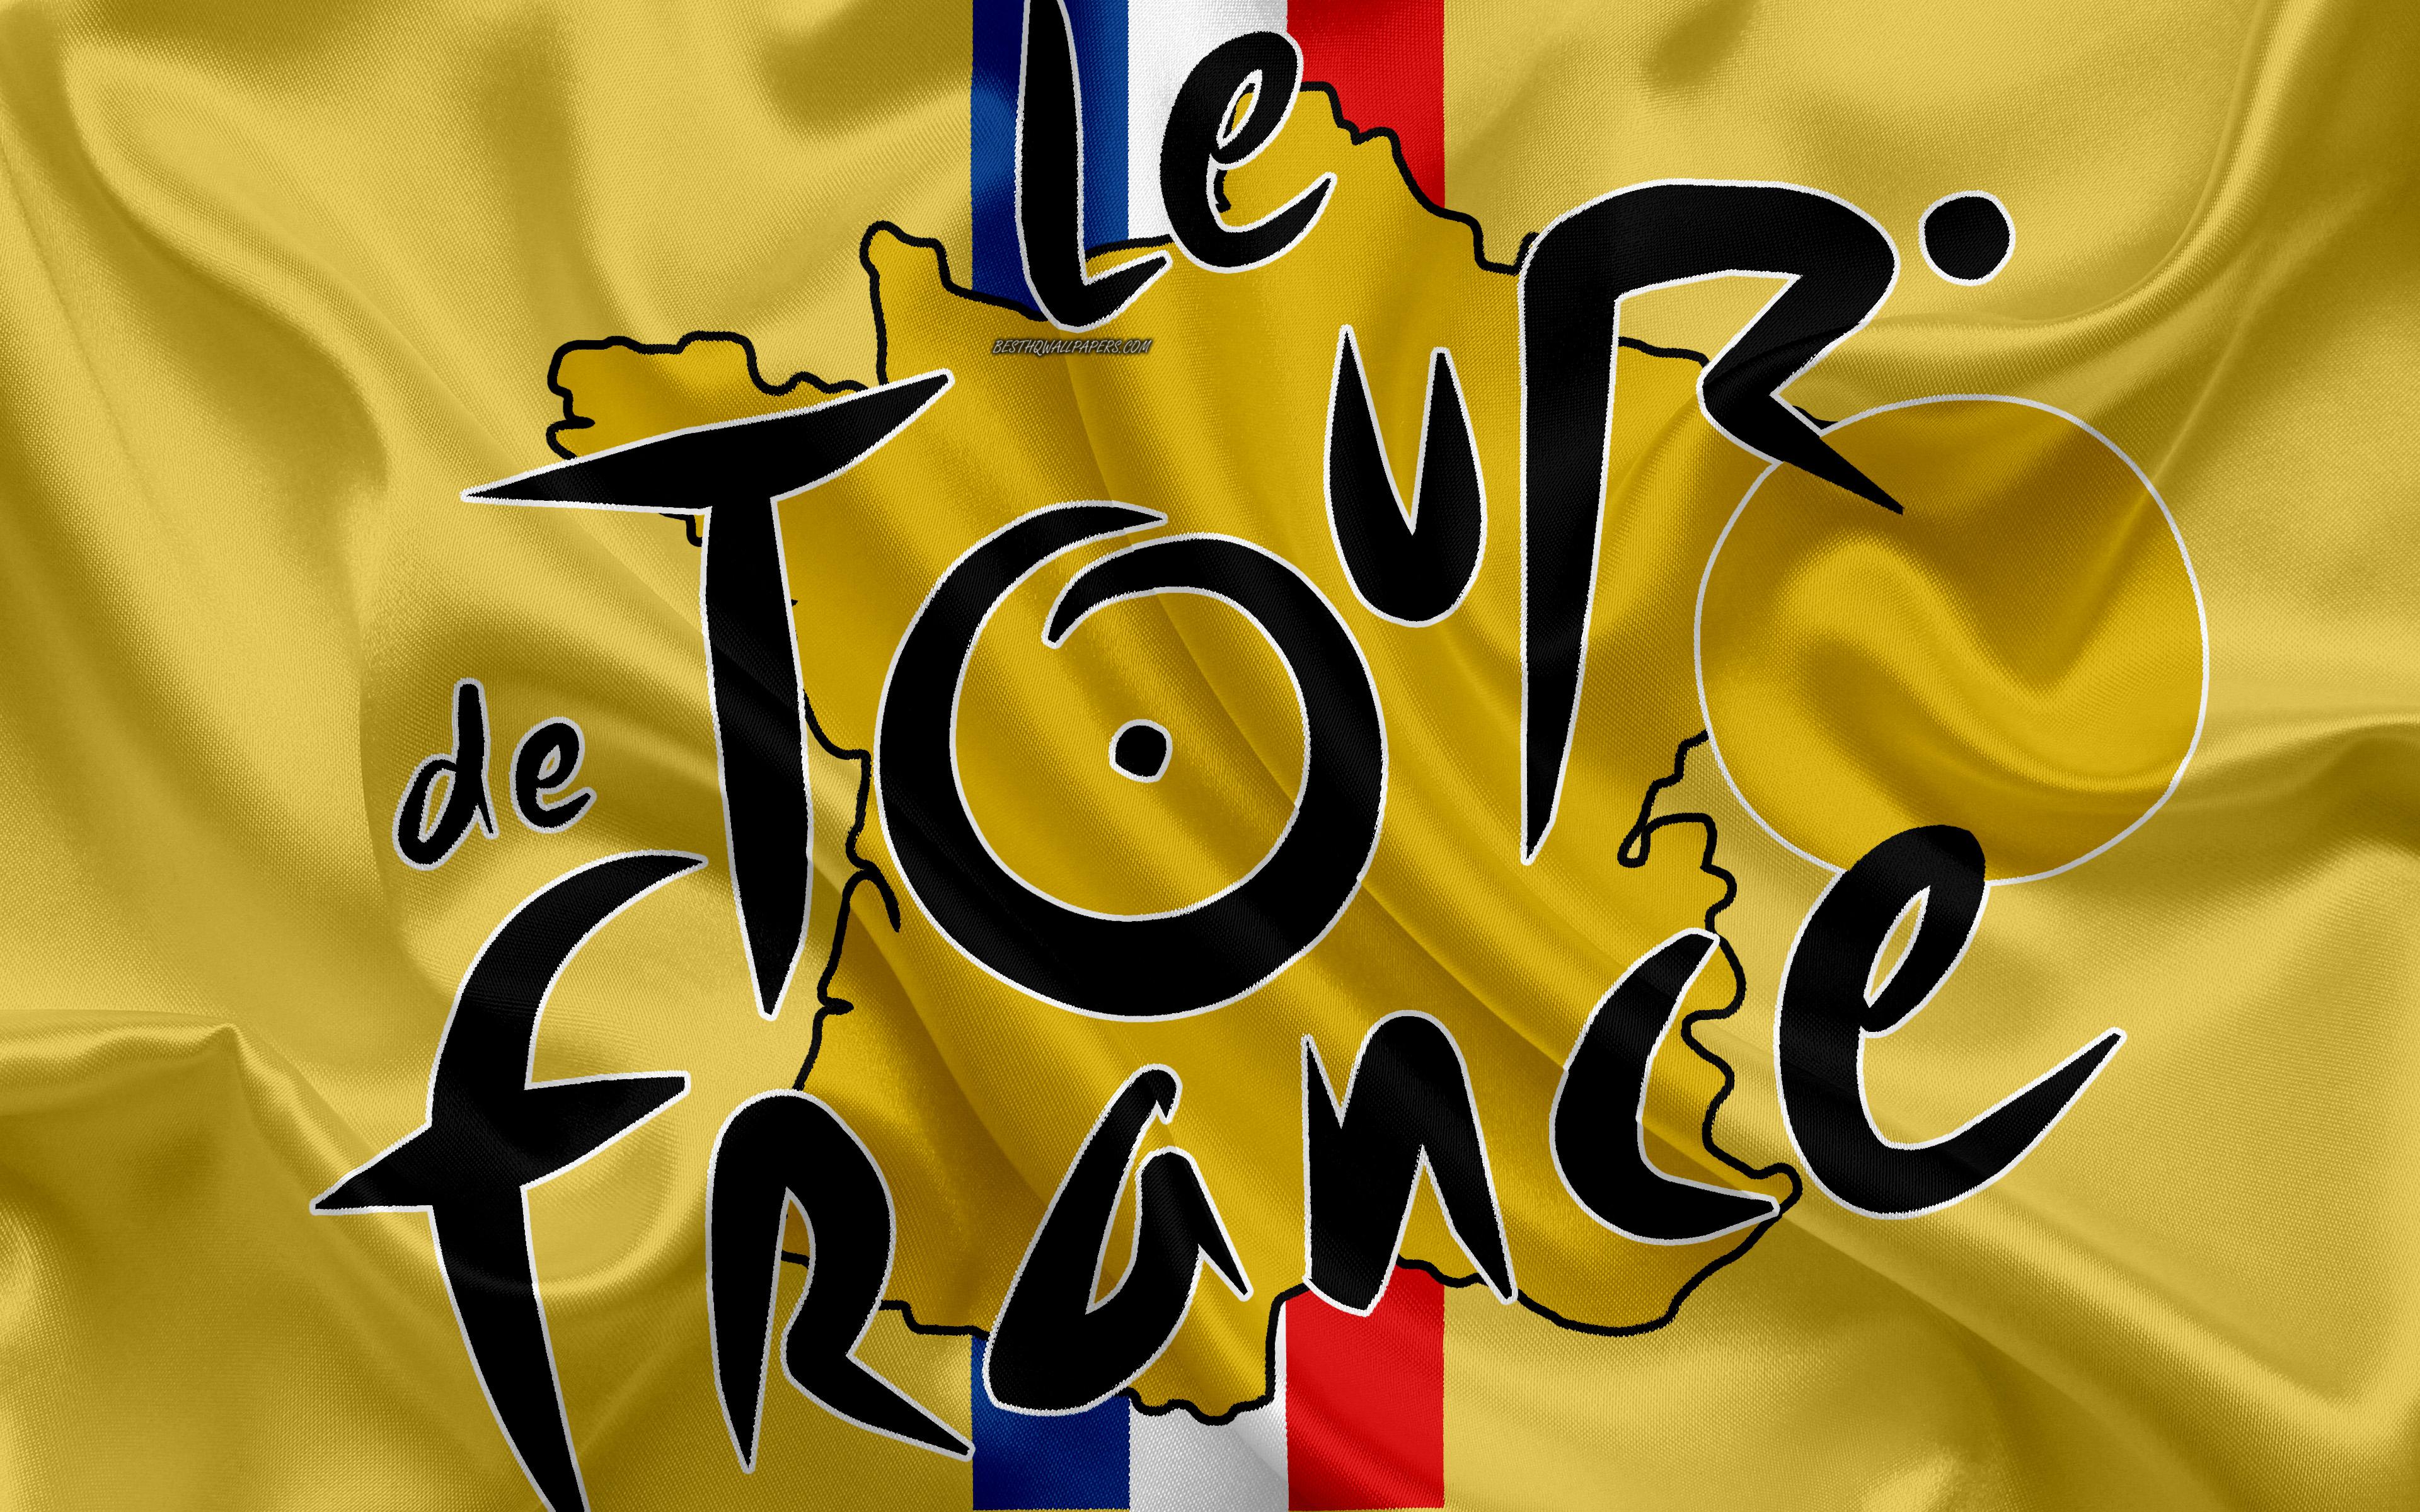 Download wallpaper Tour de France, 4k, yellow silk flag, logo, art, bicycle race, France, silk texture for desktop with resolution 3840x2400. High Quality HD picture wallpaper